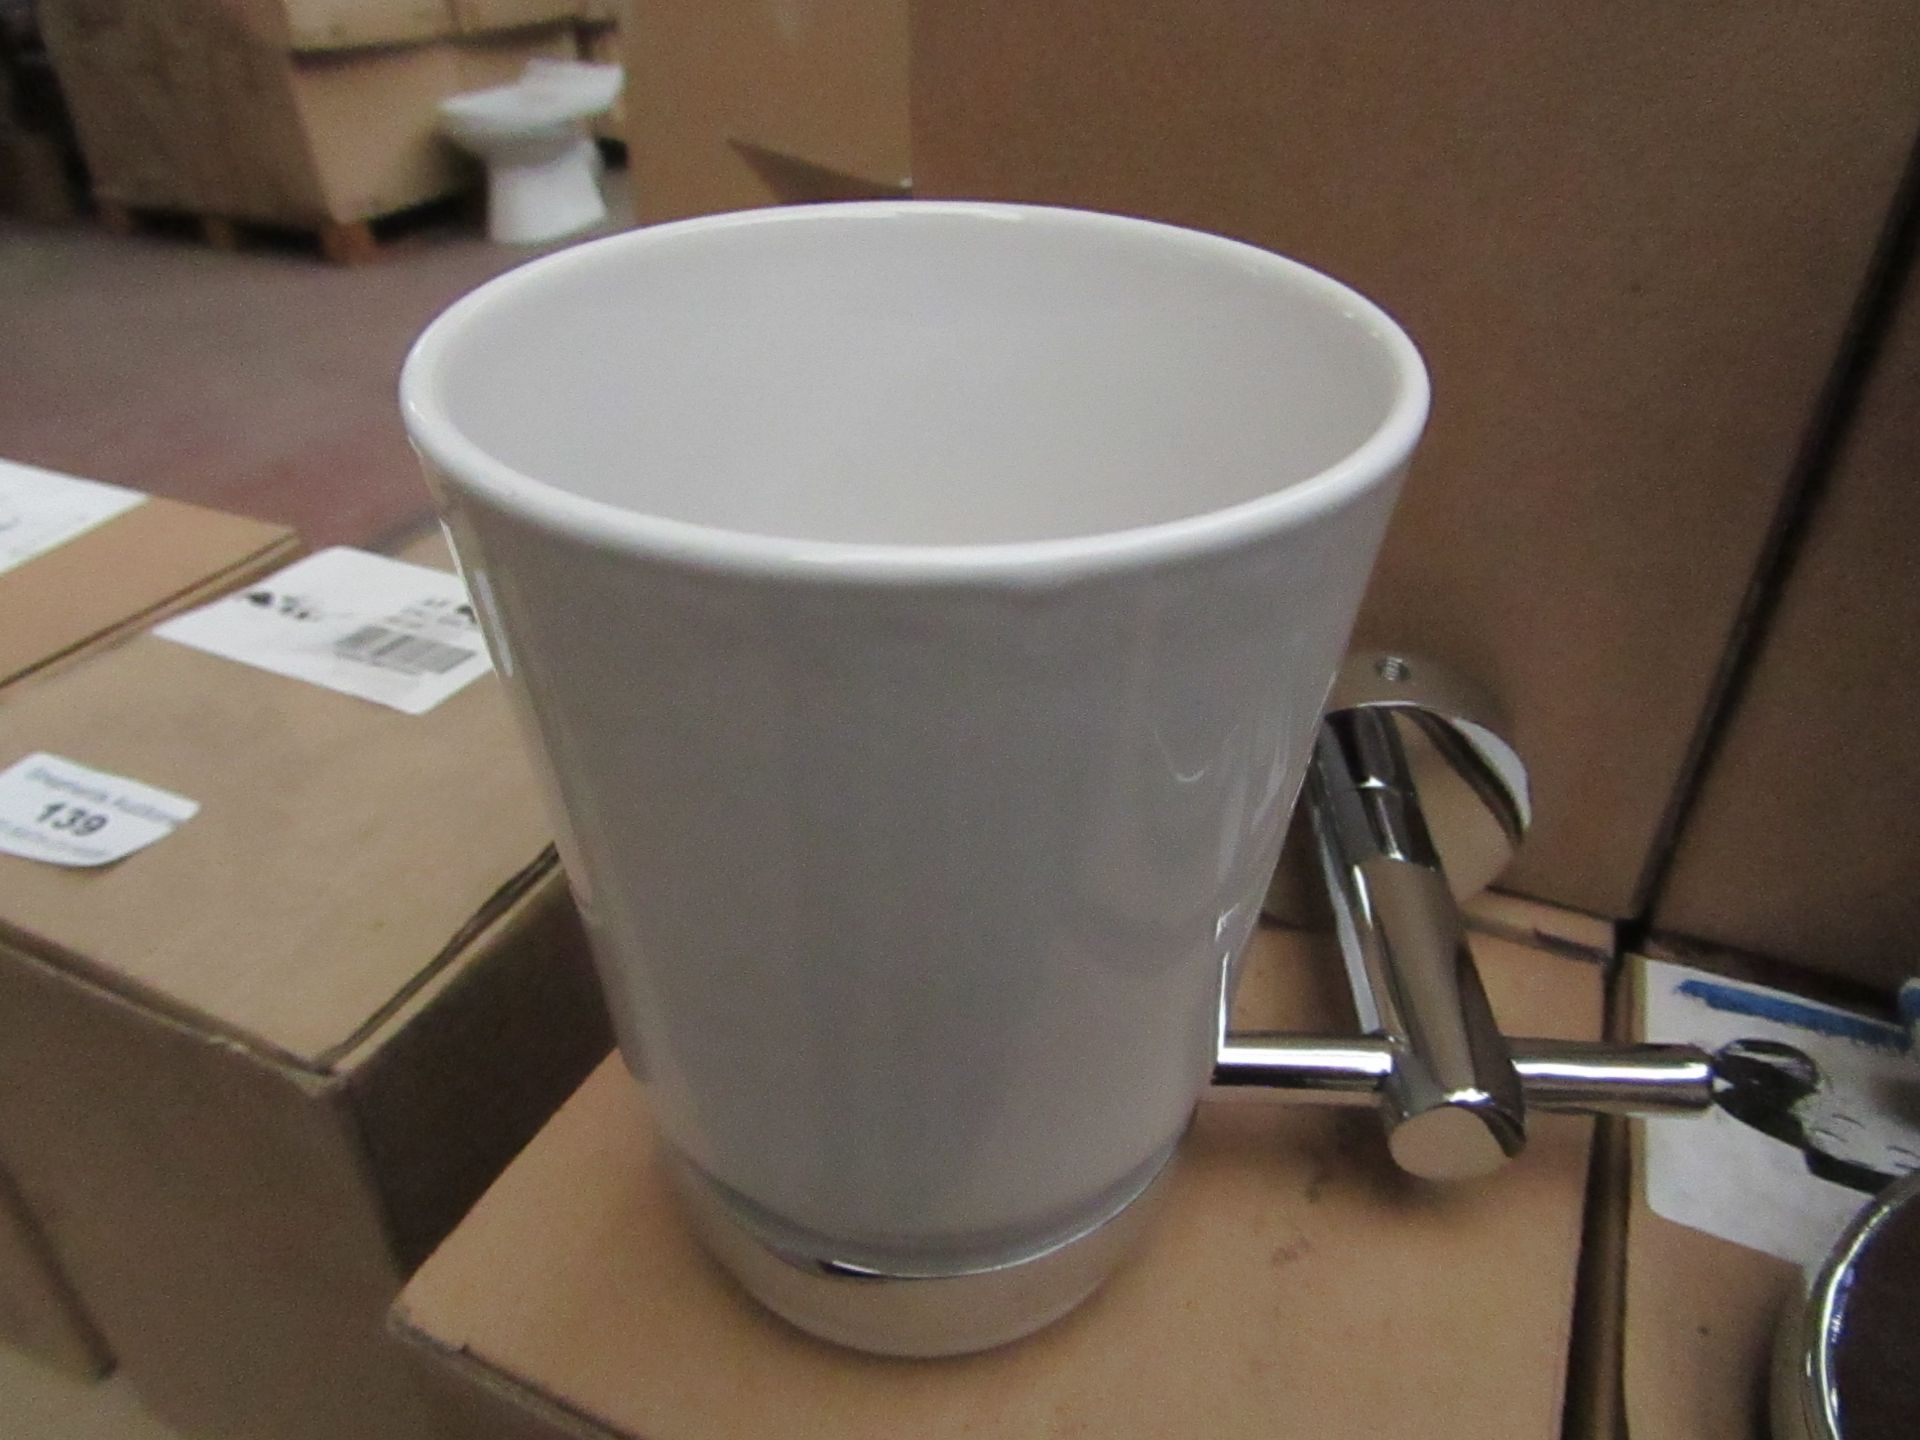 5x Ceramic tumbler holder, new and boxed. AFZ32